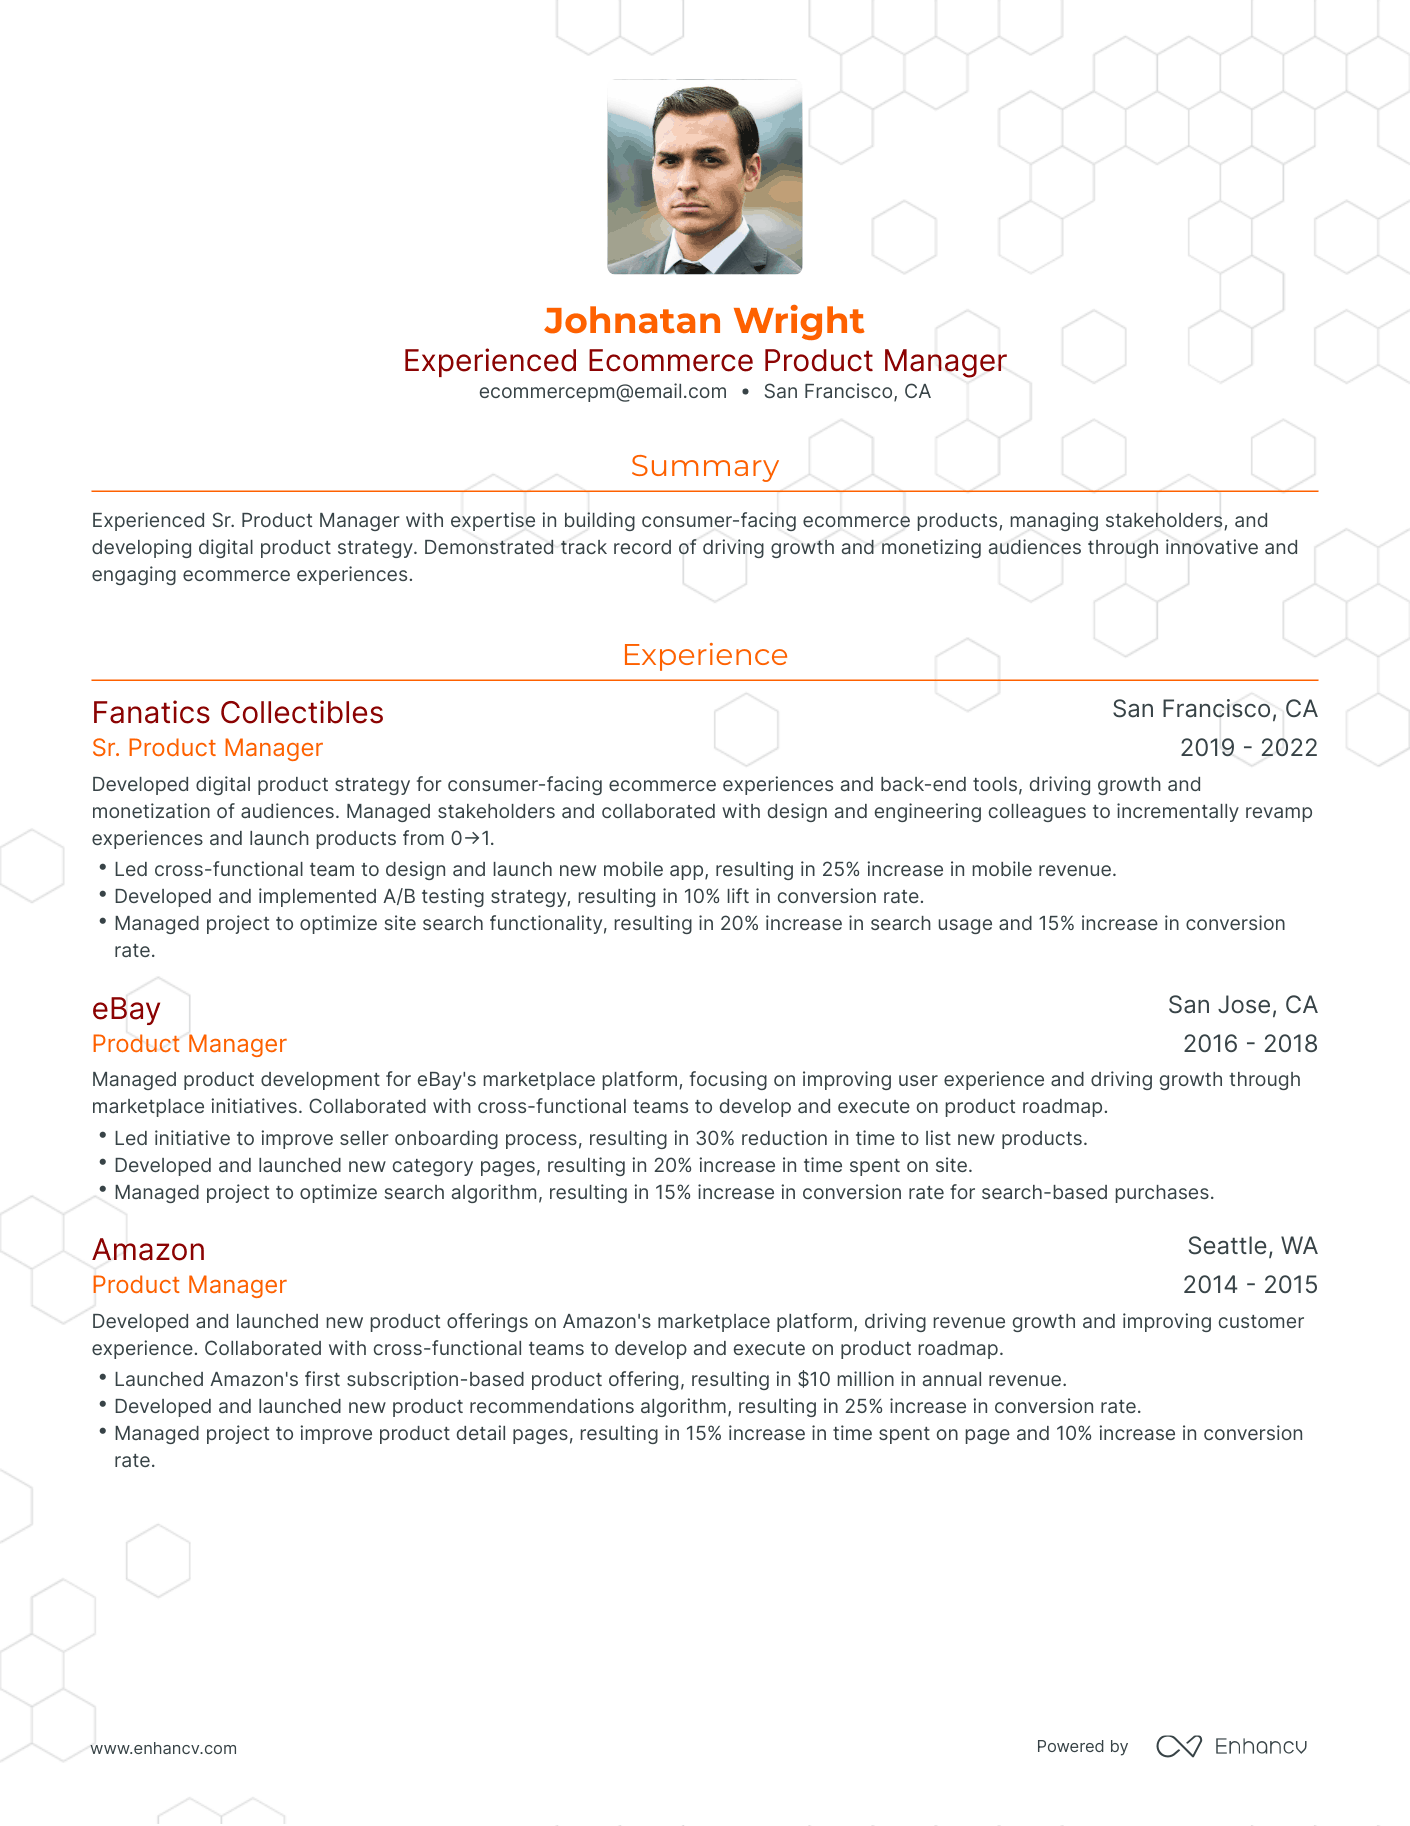 Traditional Ecommerce Product Manager Resume Template